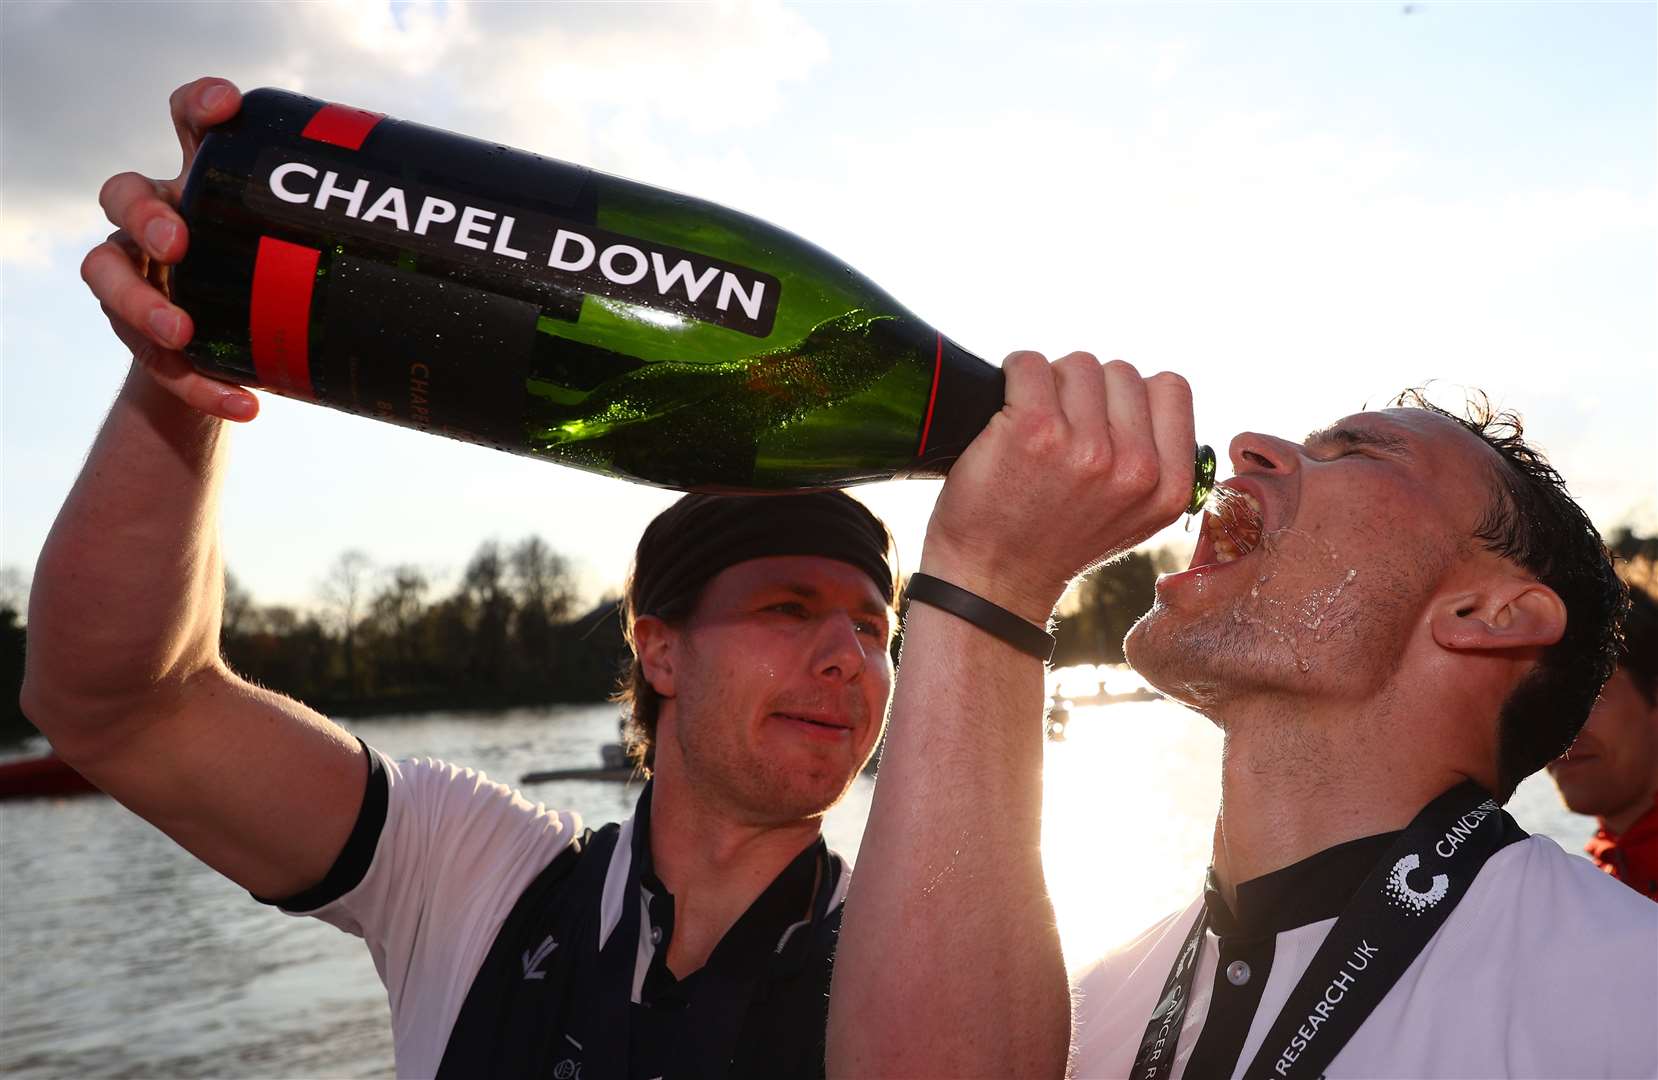 Victors in the men's Boat Race celebrate with Chapel Down Brut